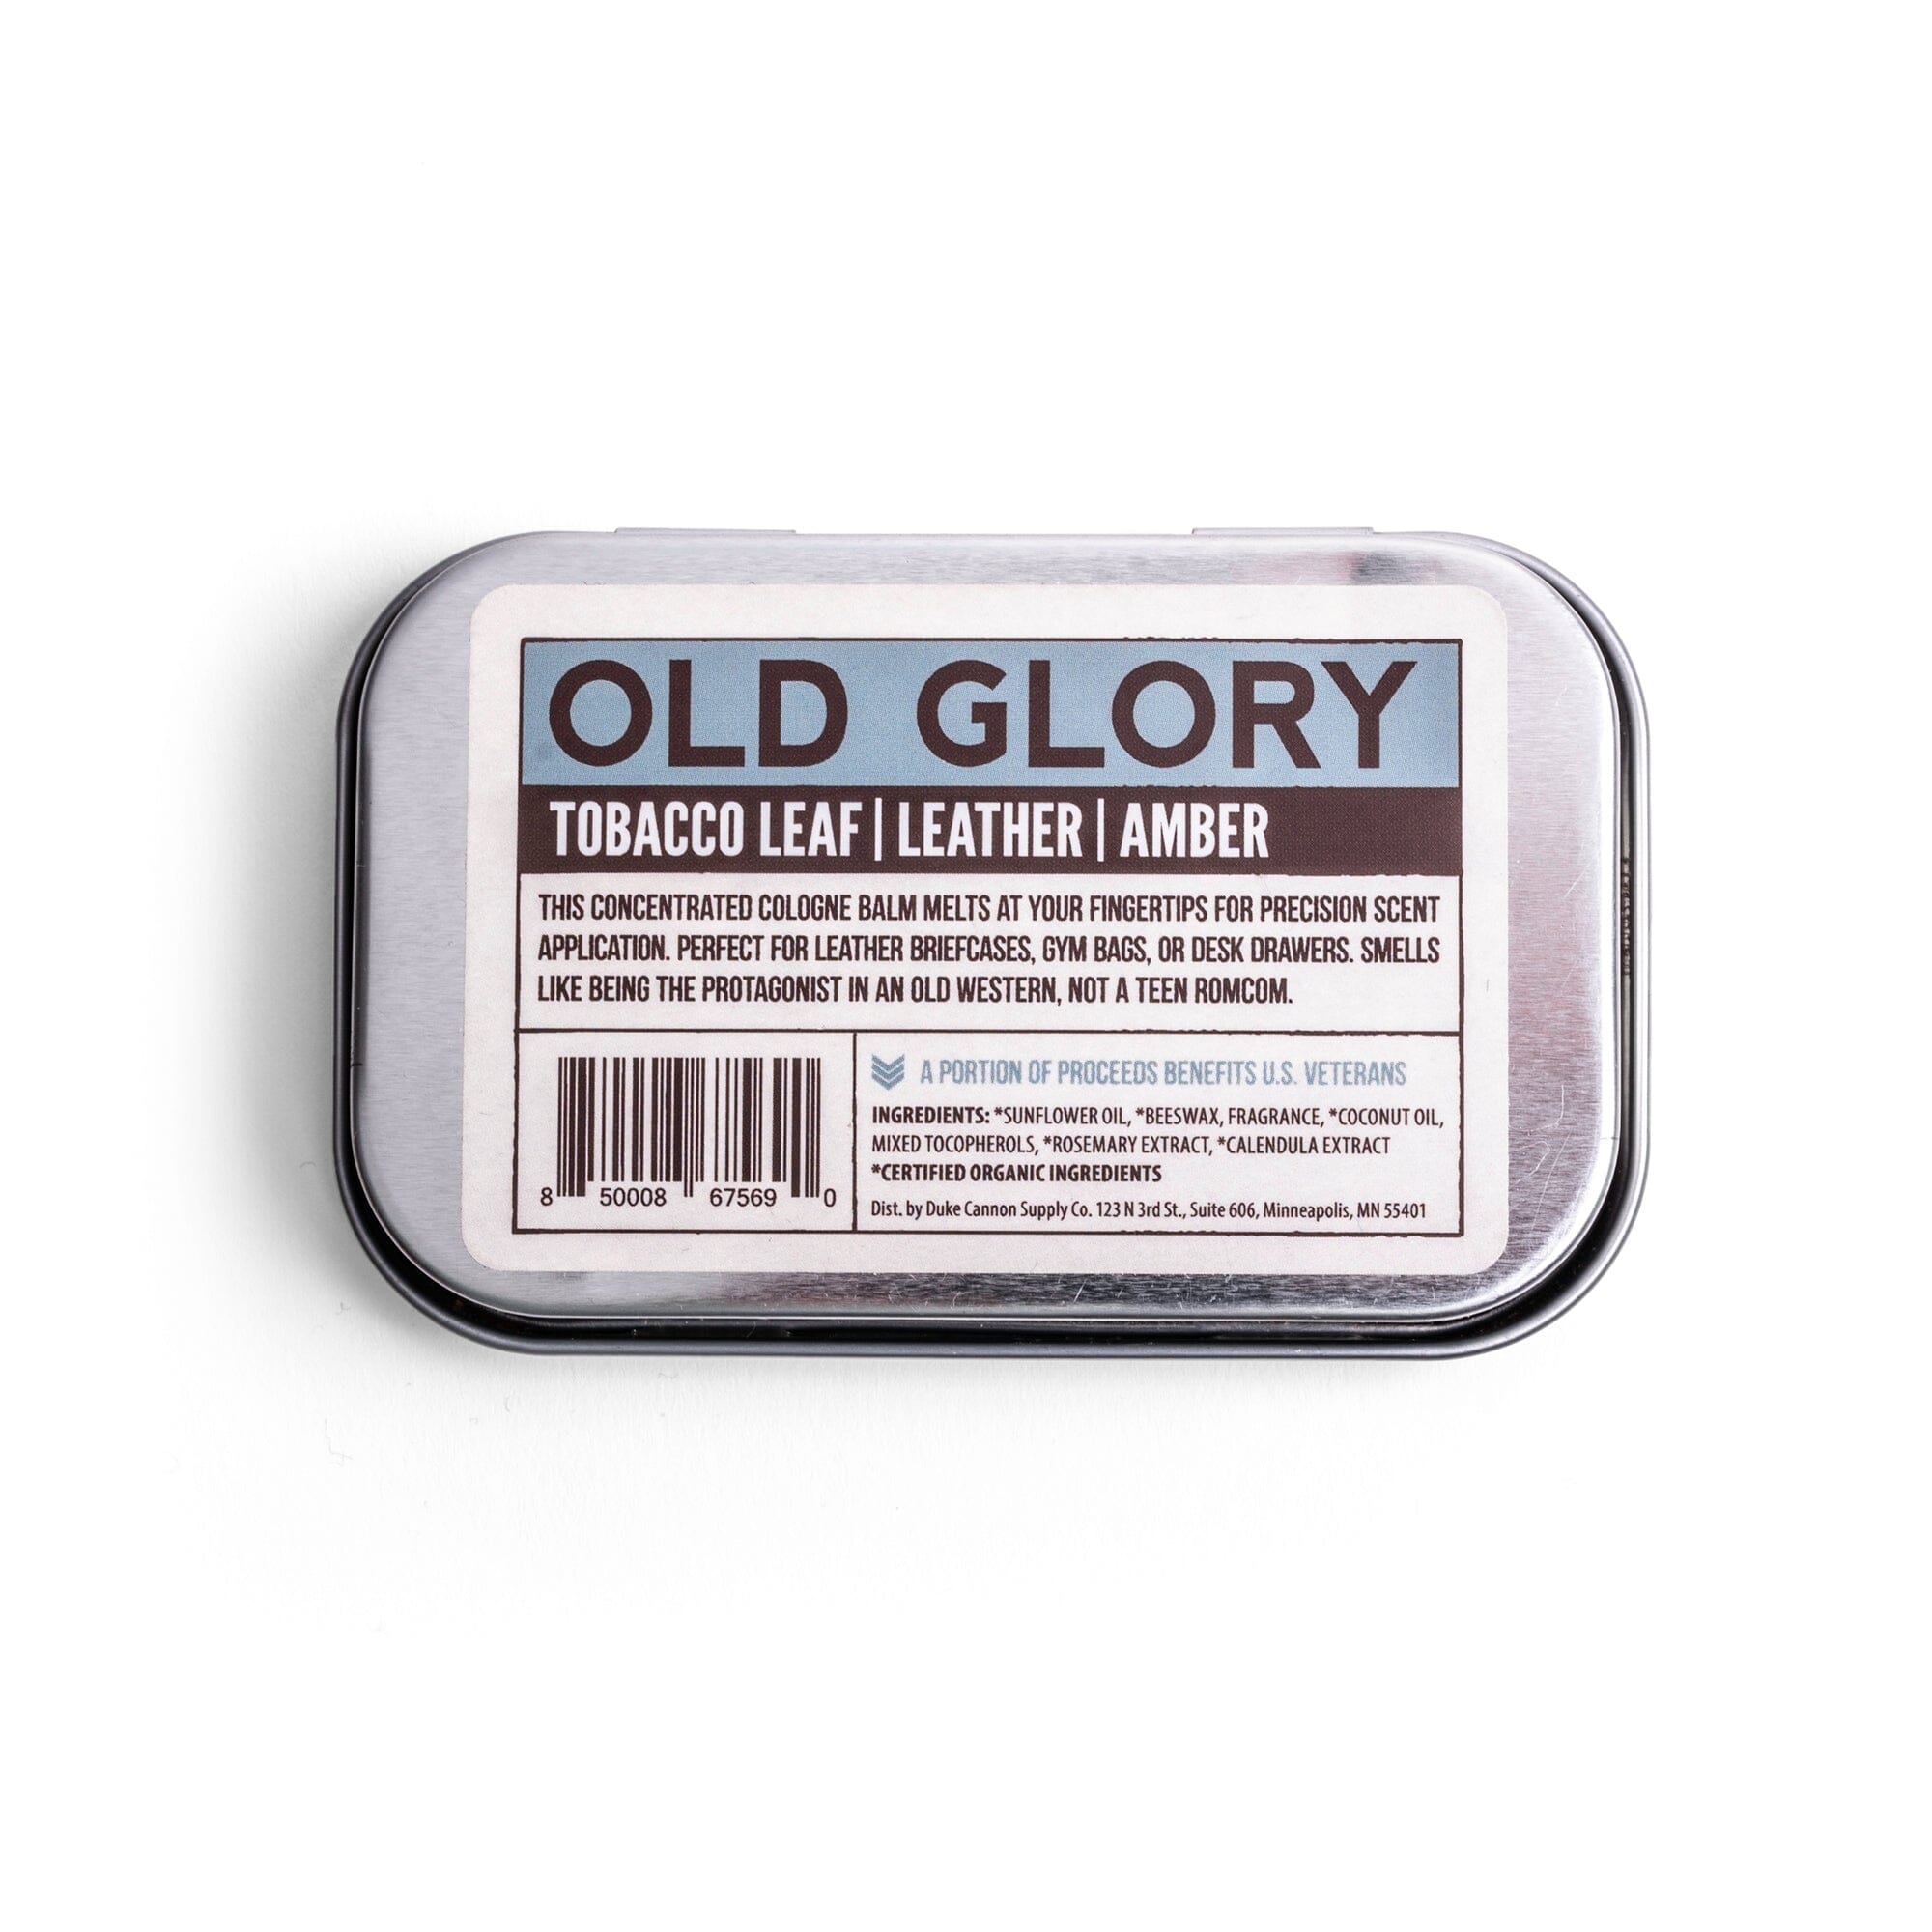 Back Label of Duke Cannon Old Glory Men's Solid Cologne in Metal Tin 1.5oz | Keyway